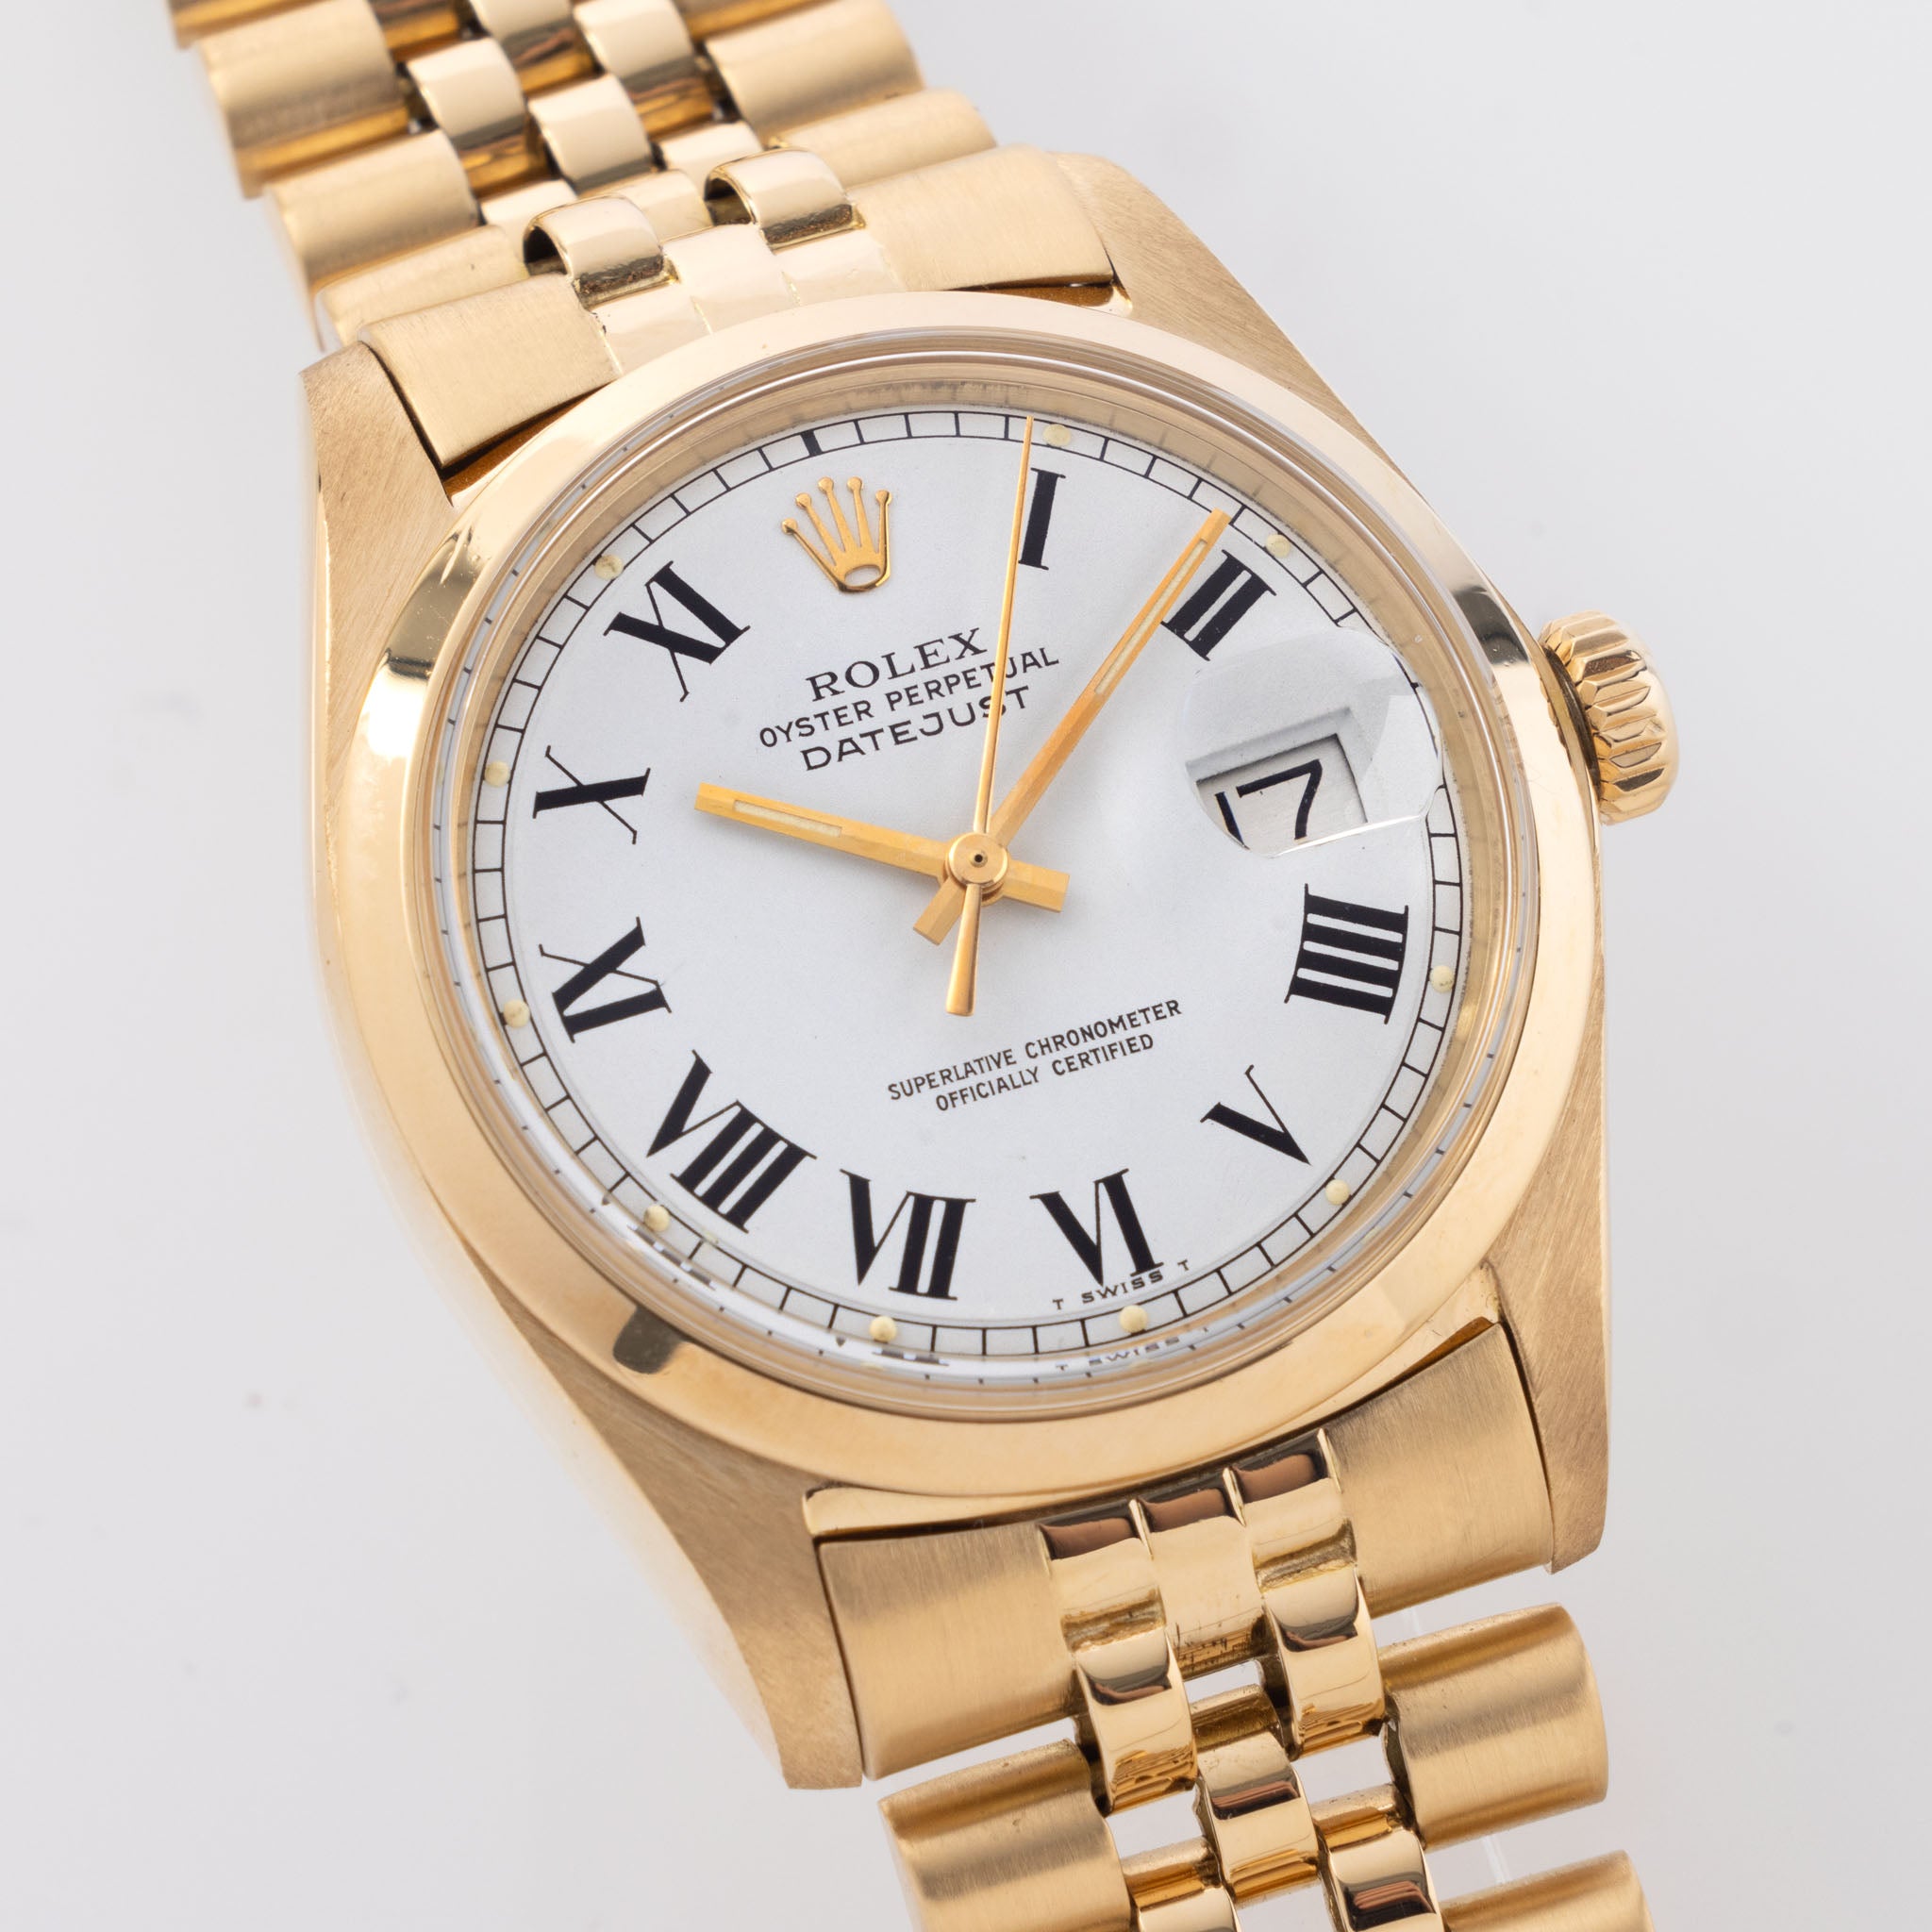 Rolex Datejust 18kt Yellow Gold White Buckley Dial Ref 1600